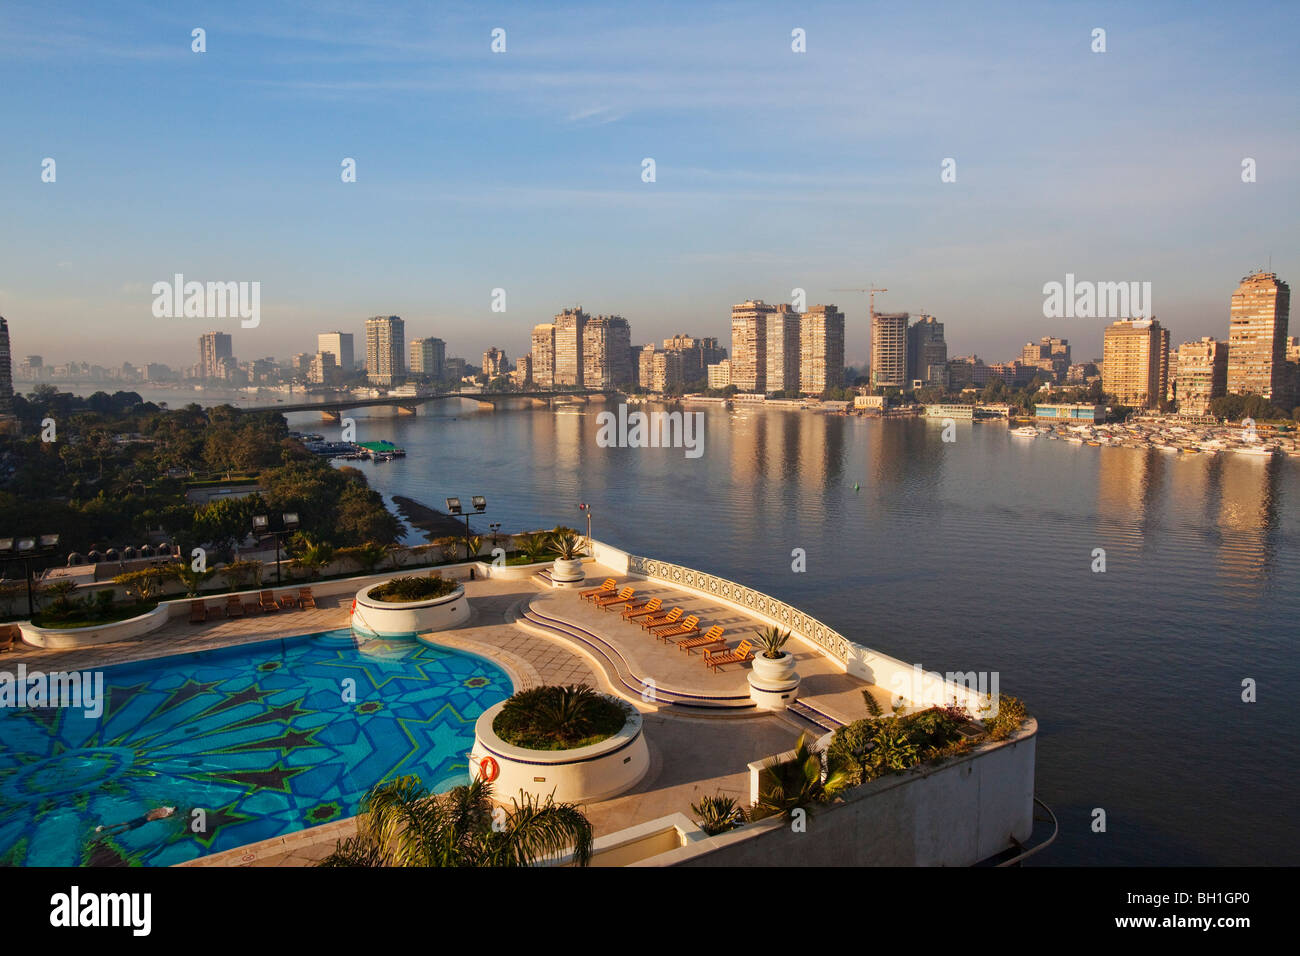 View at the pool of the Grand Hyatt hotel and high rise buildings on the banks of the river Nile, Cairo, Egypt, Africa Stock Photo